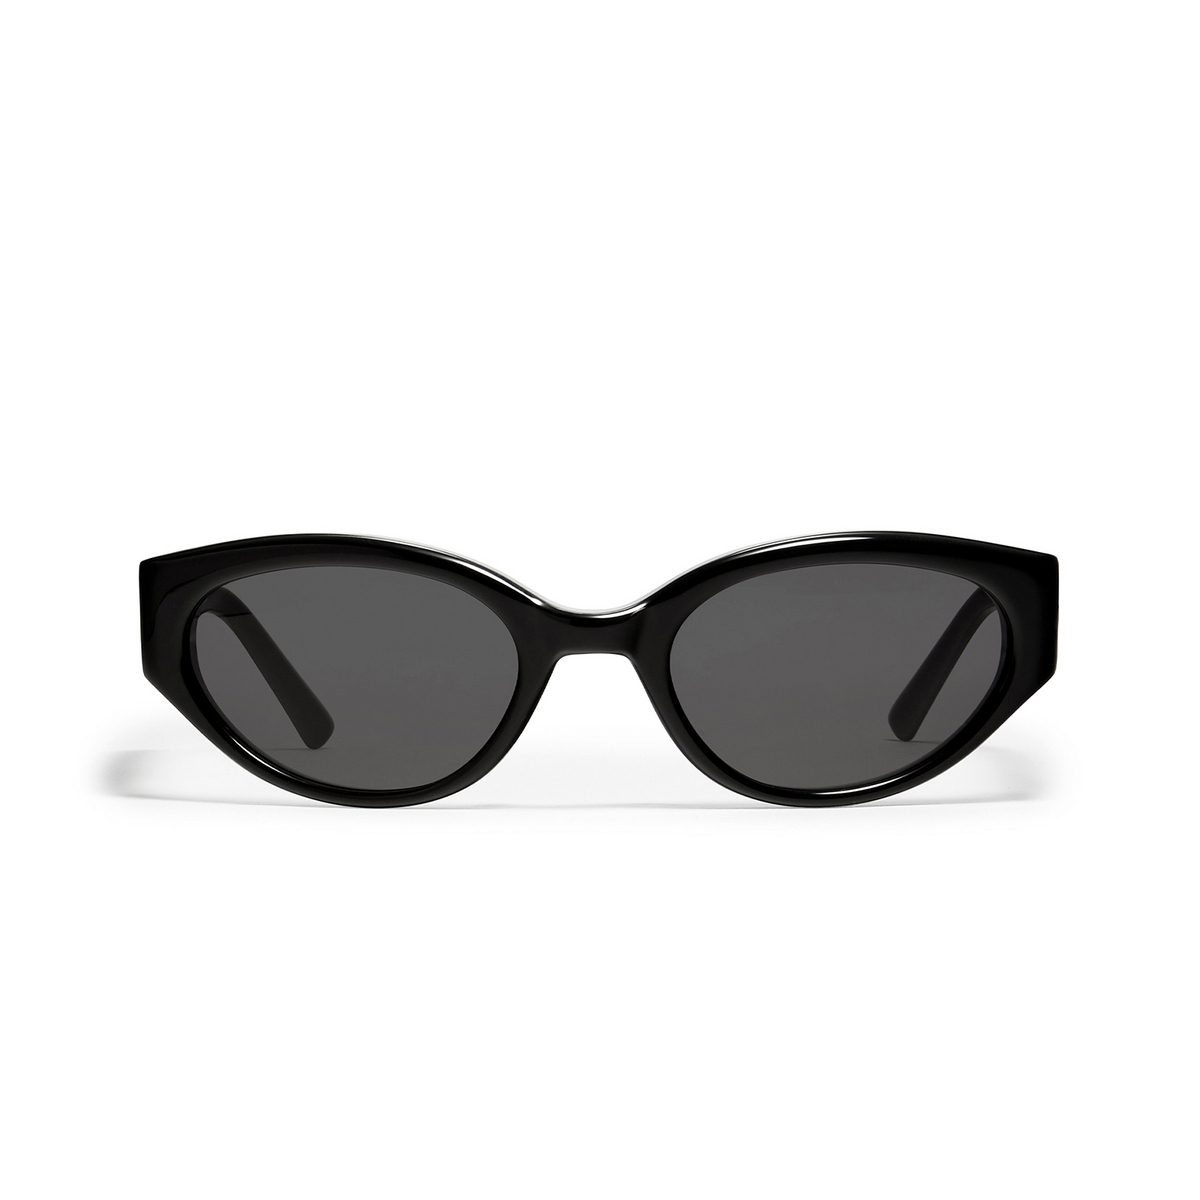 Gentle Monster® Cat-eye Sunglasses: Molto color Black 01 - front view.